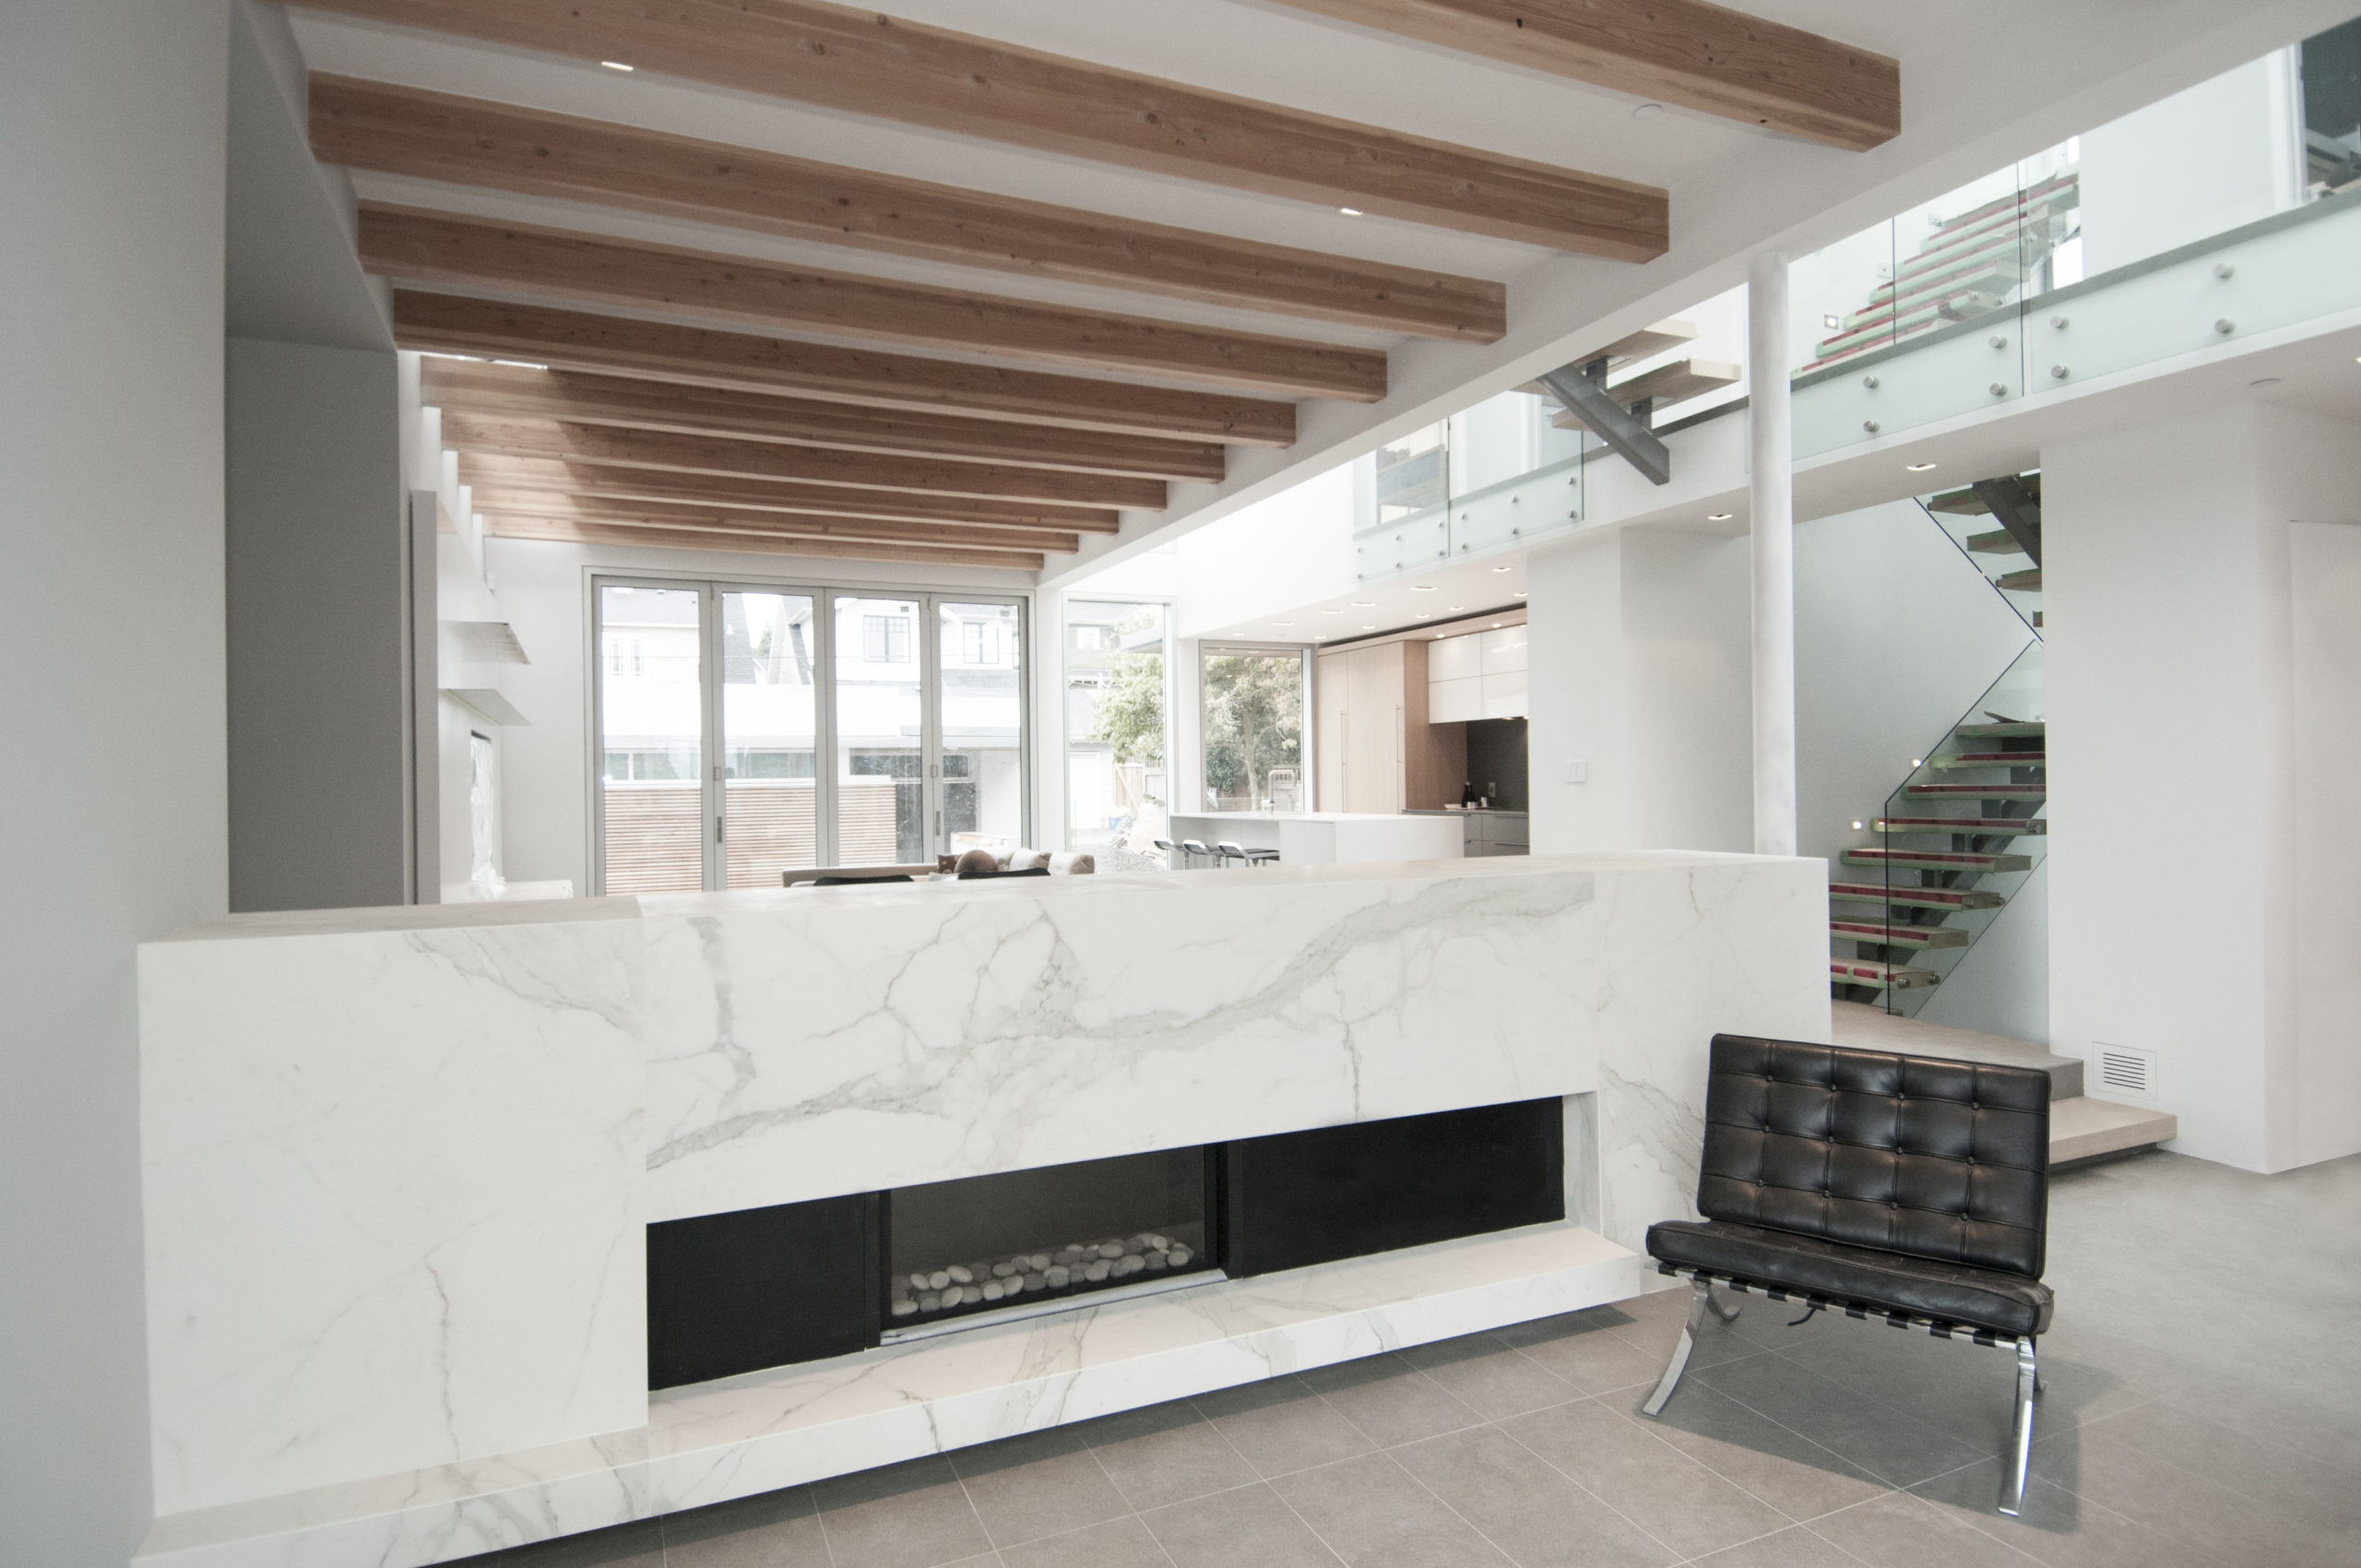 Main Floor of a Vancouver custom home with a clean and modern interior design.